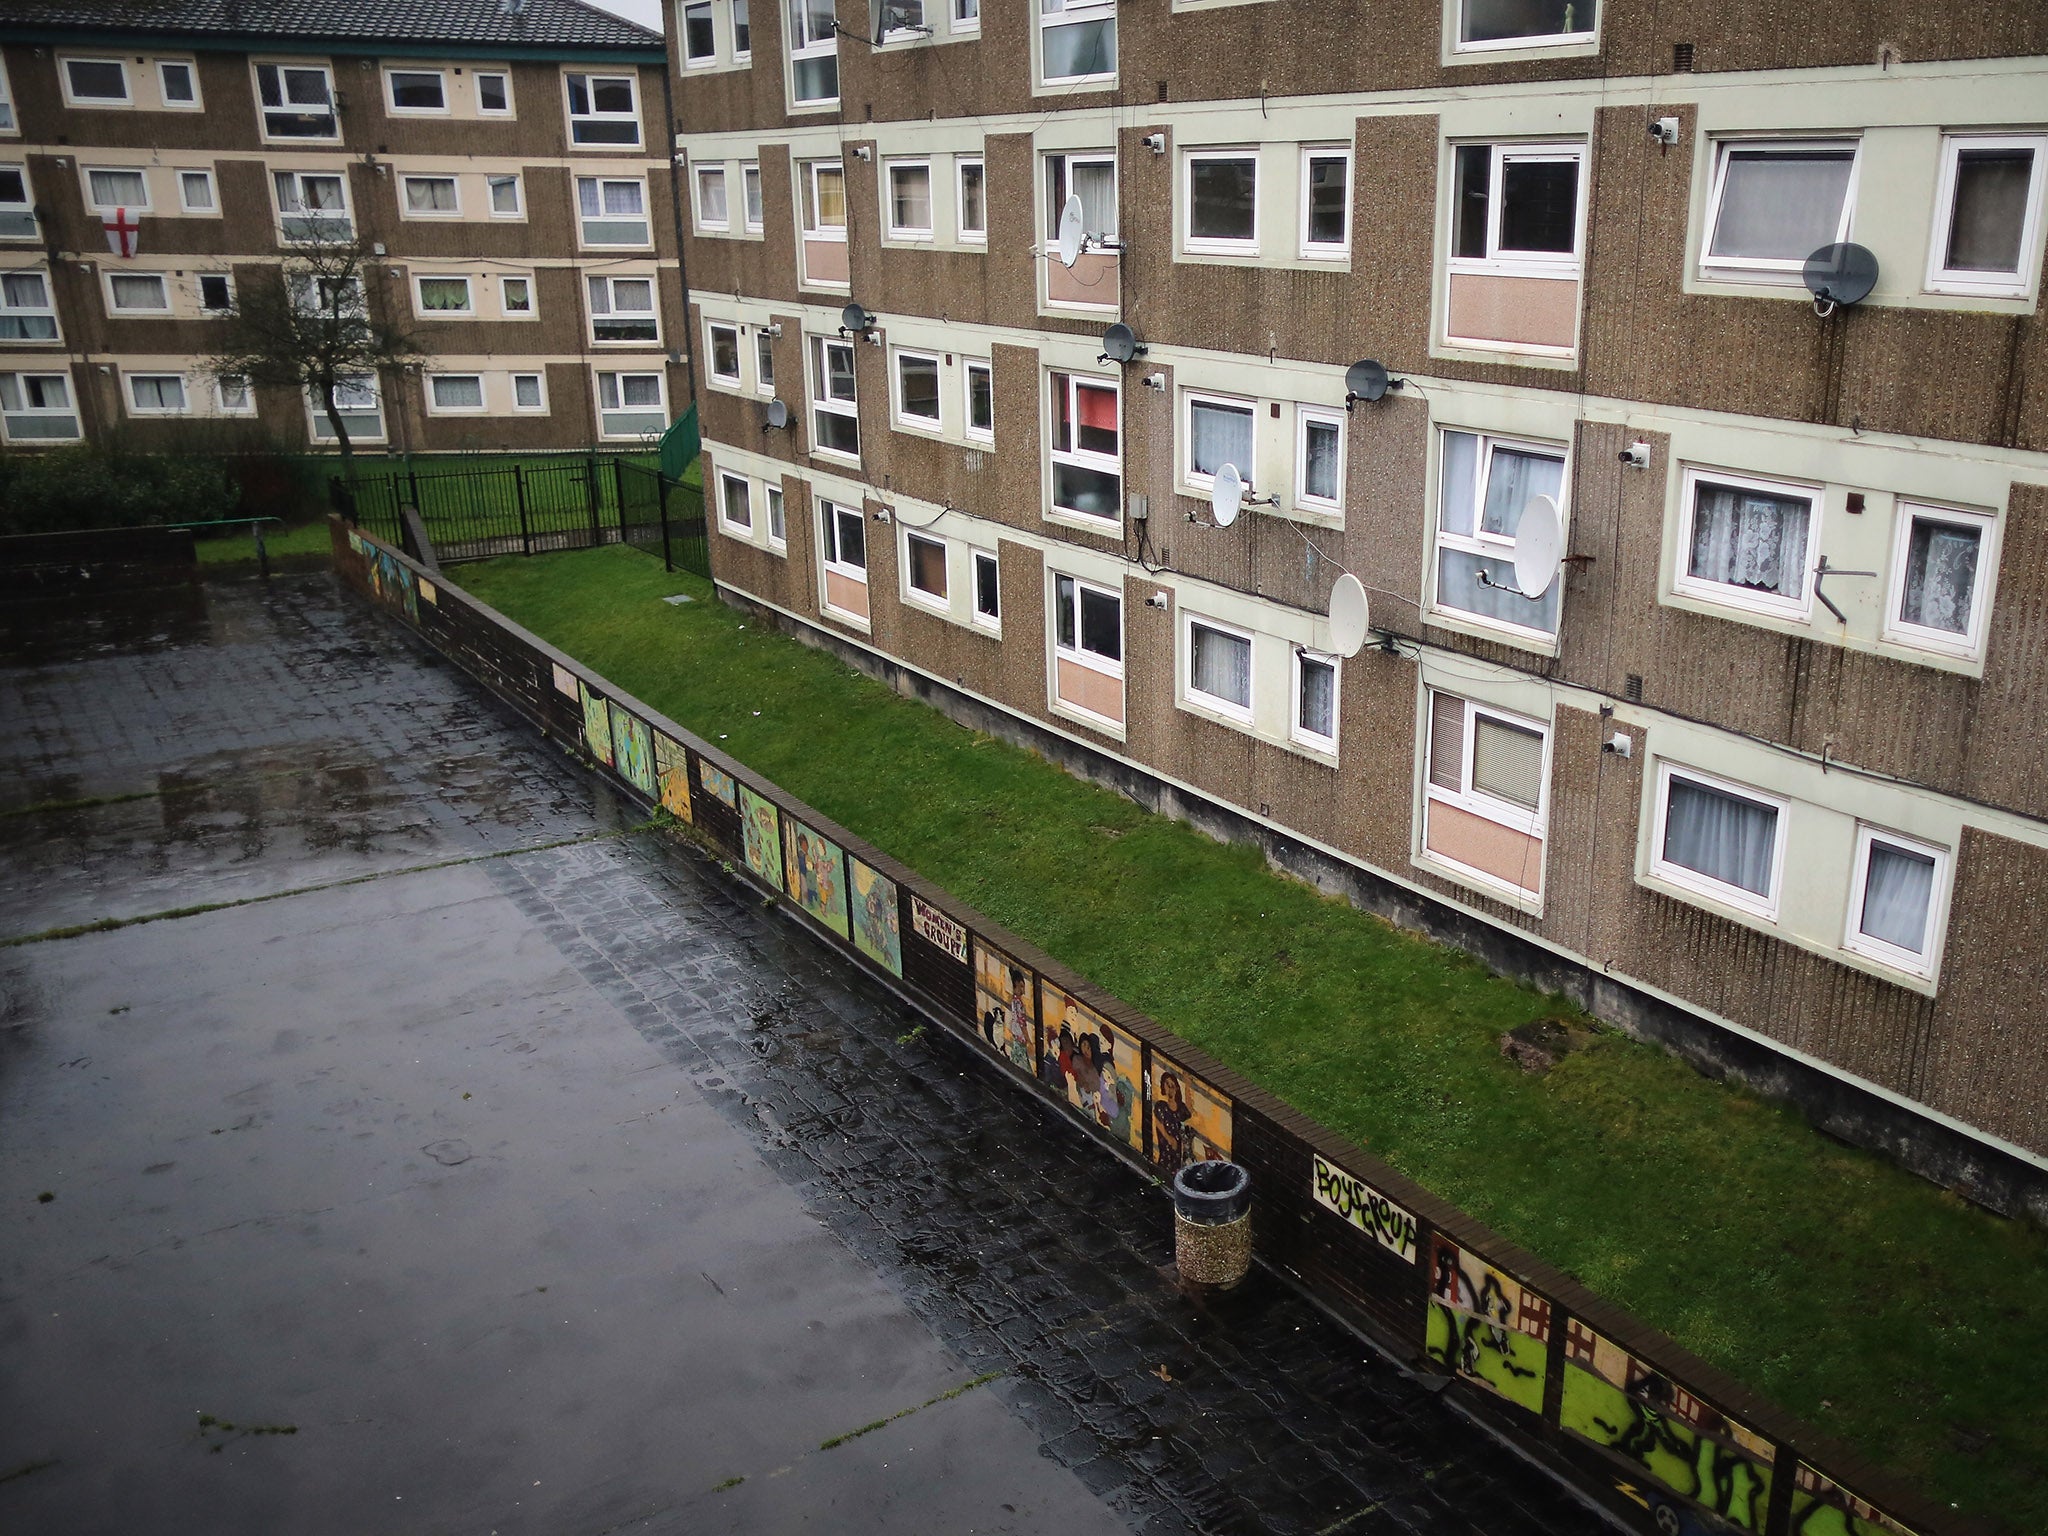 The Parker Morris standard was abolished by Thatcher's government leading to lower standards of social housing